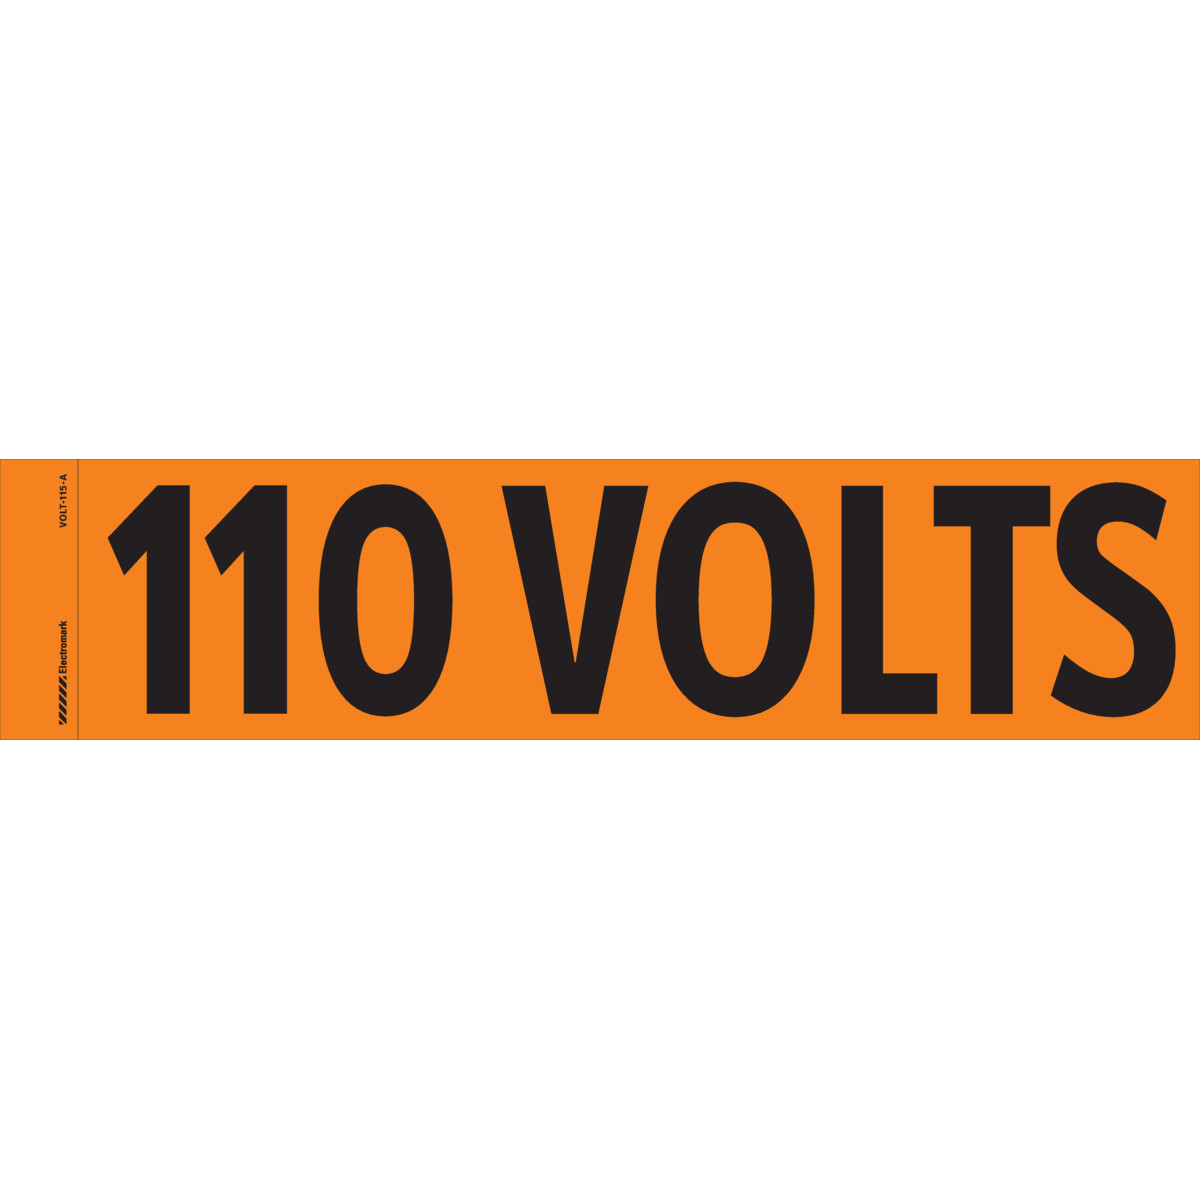 110 Volts Markers